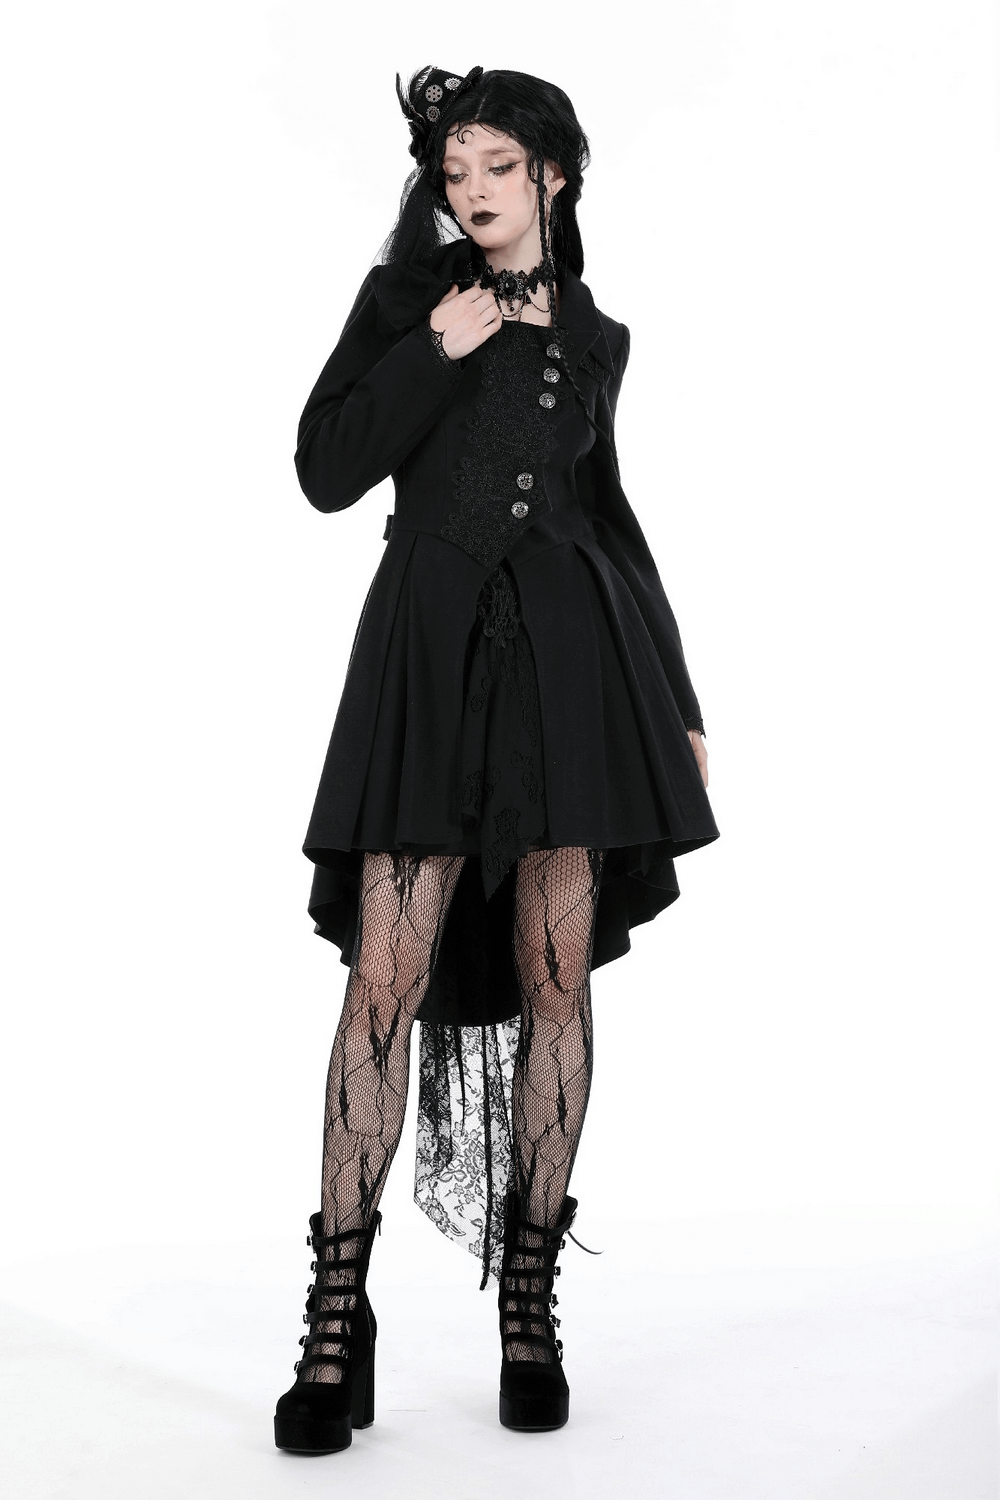 Gothic Women's Tailcoat with Lace for Stylish Looks